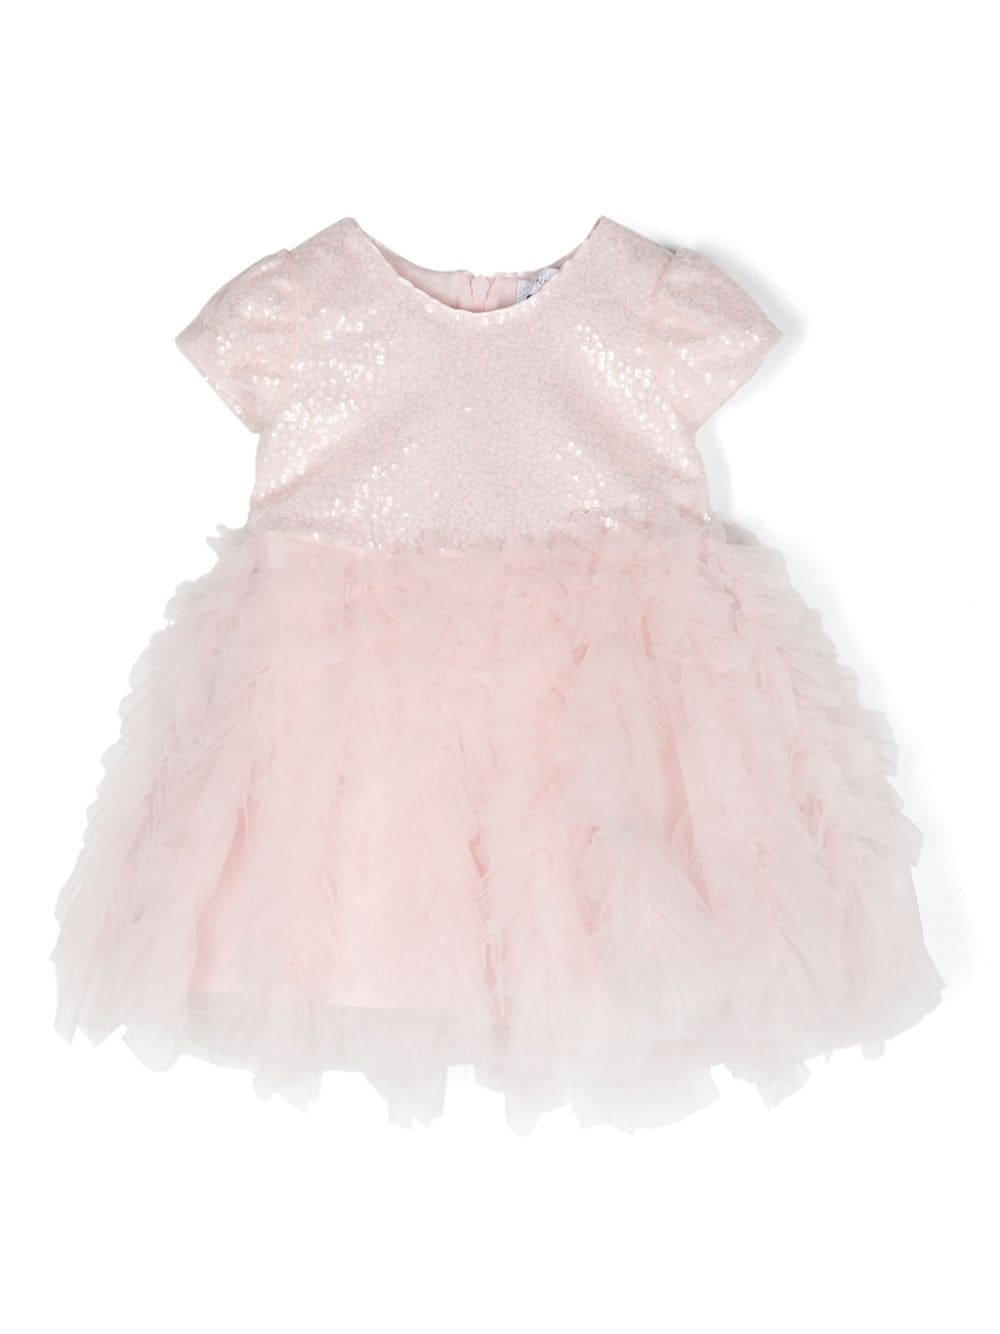 Pink sequin and tulle baby girl dress